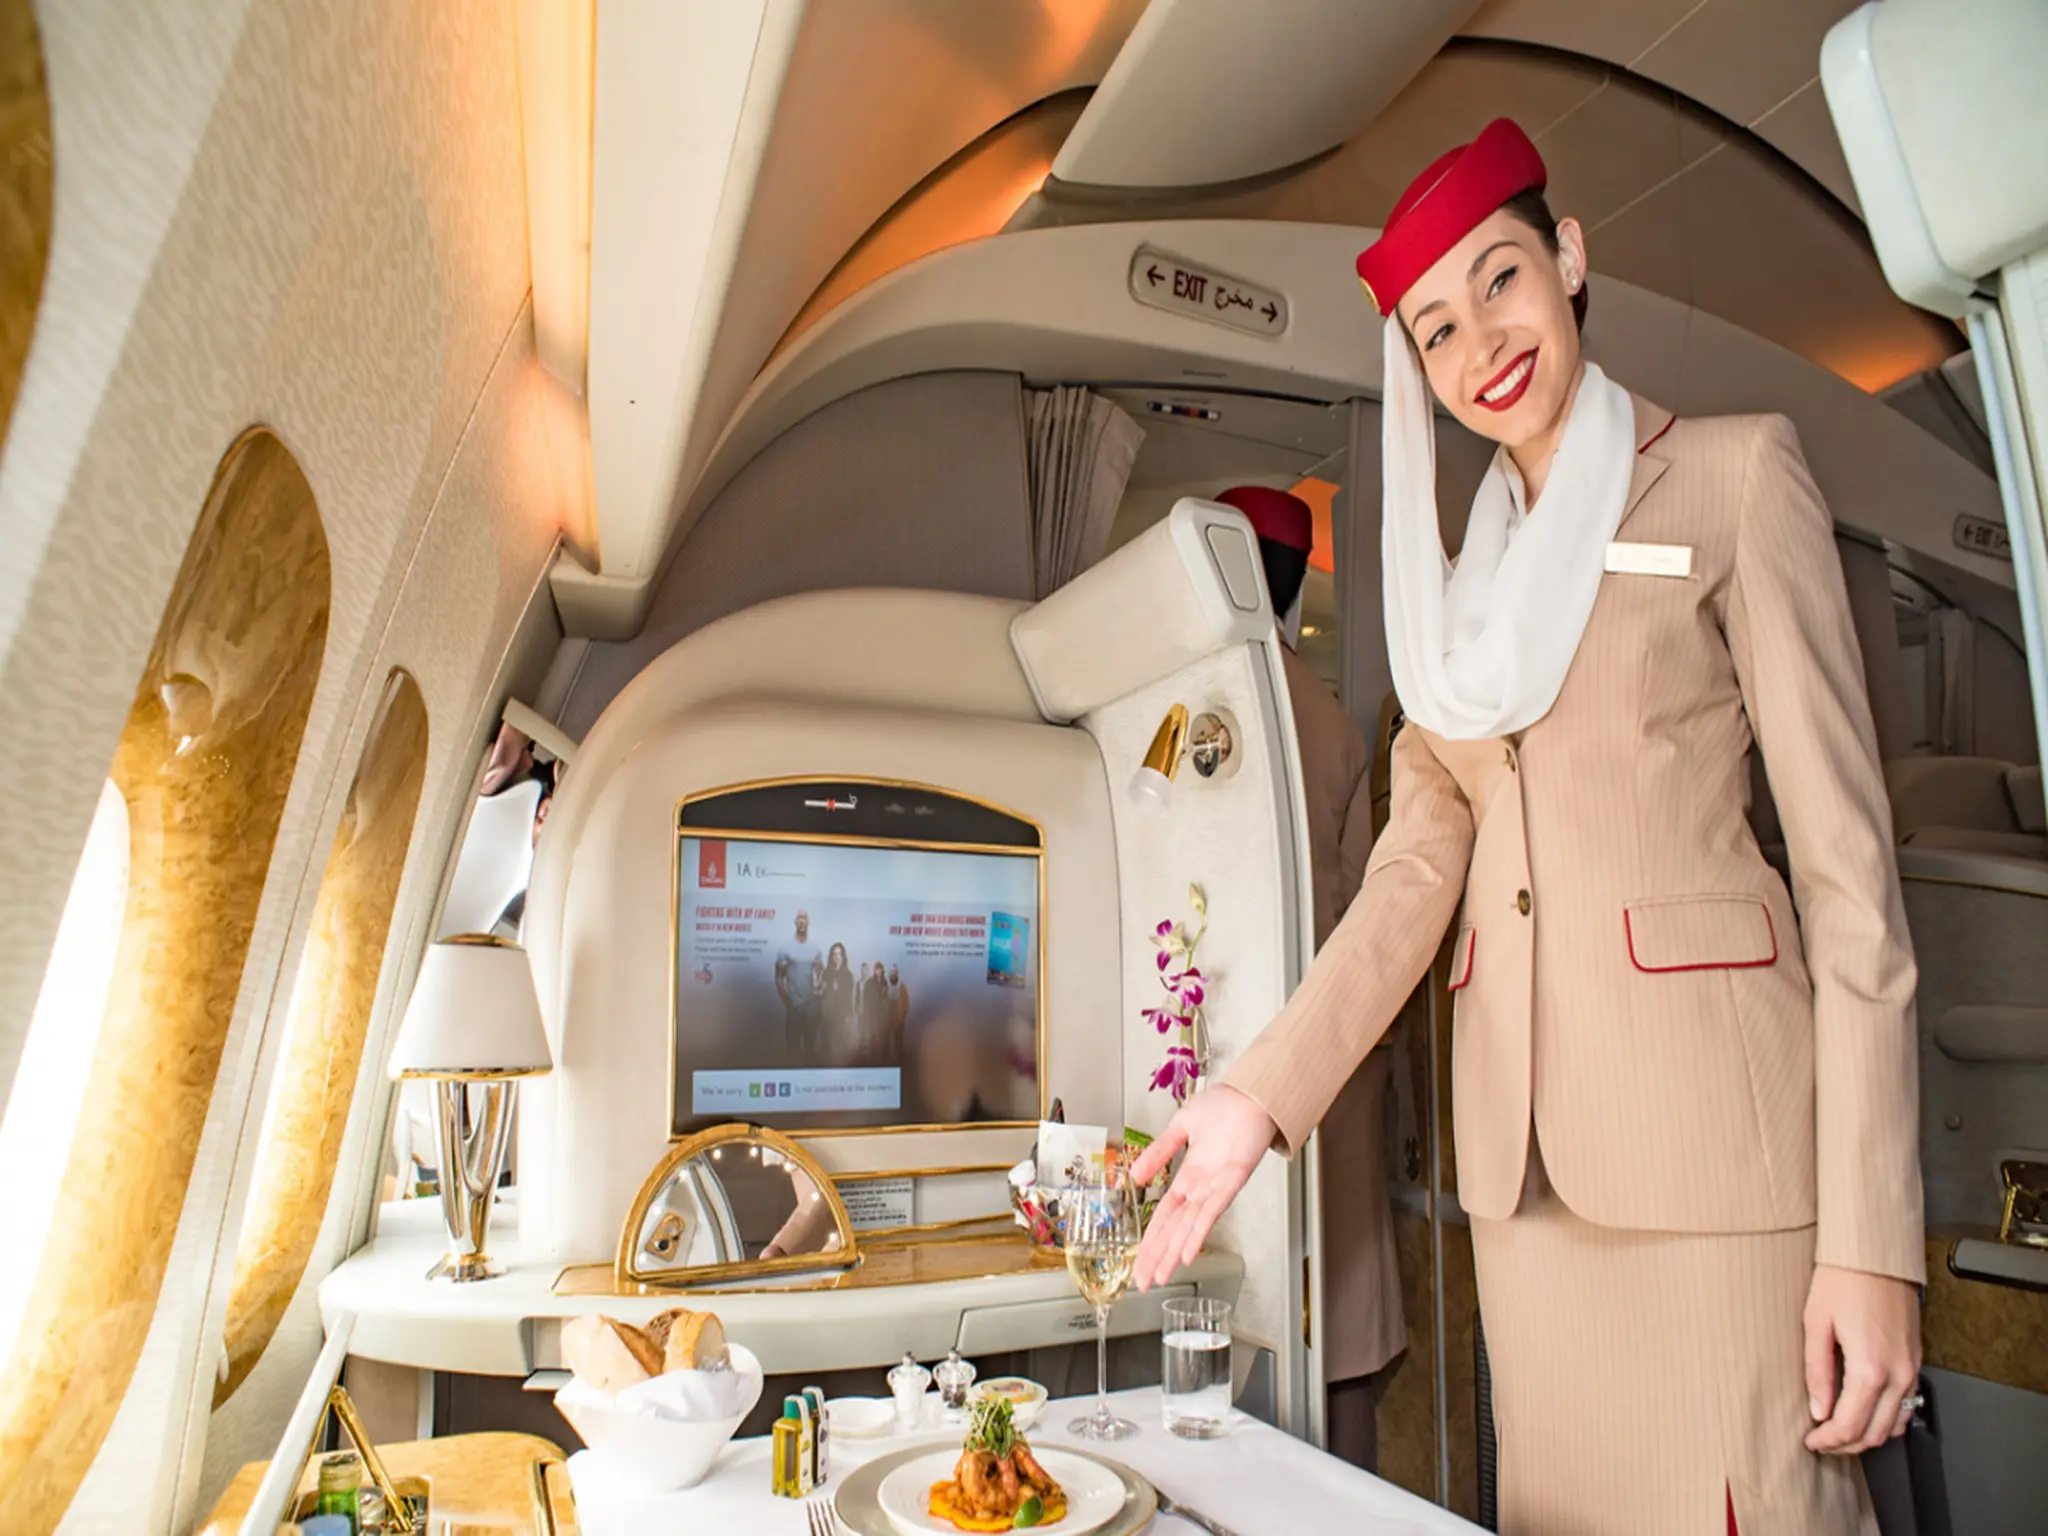 Emirates Airlines announces wonderful gifts for travelers this Christmas